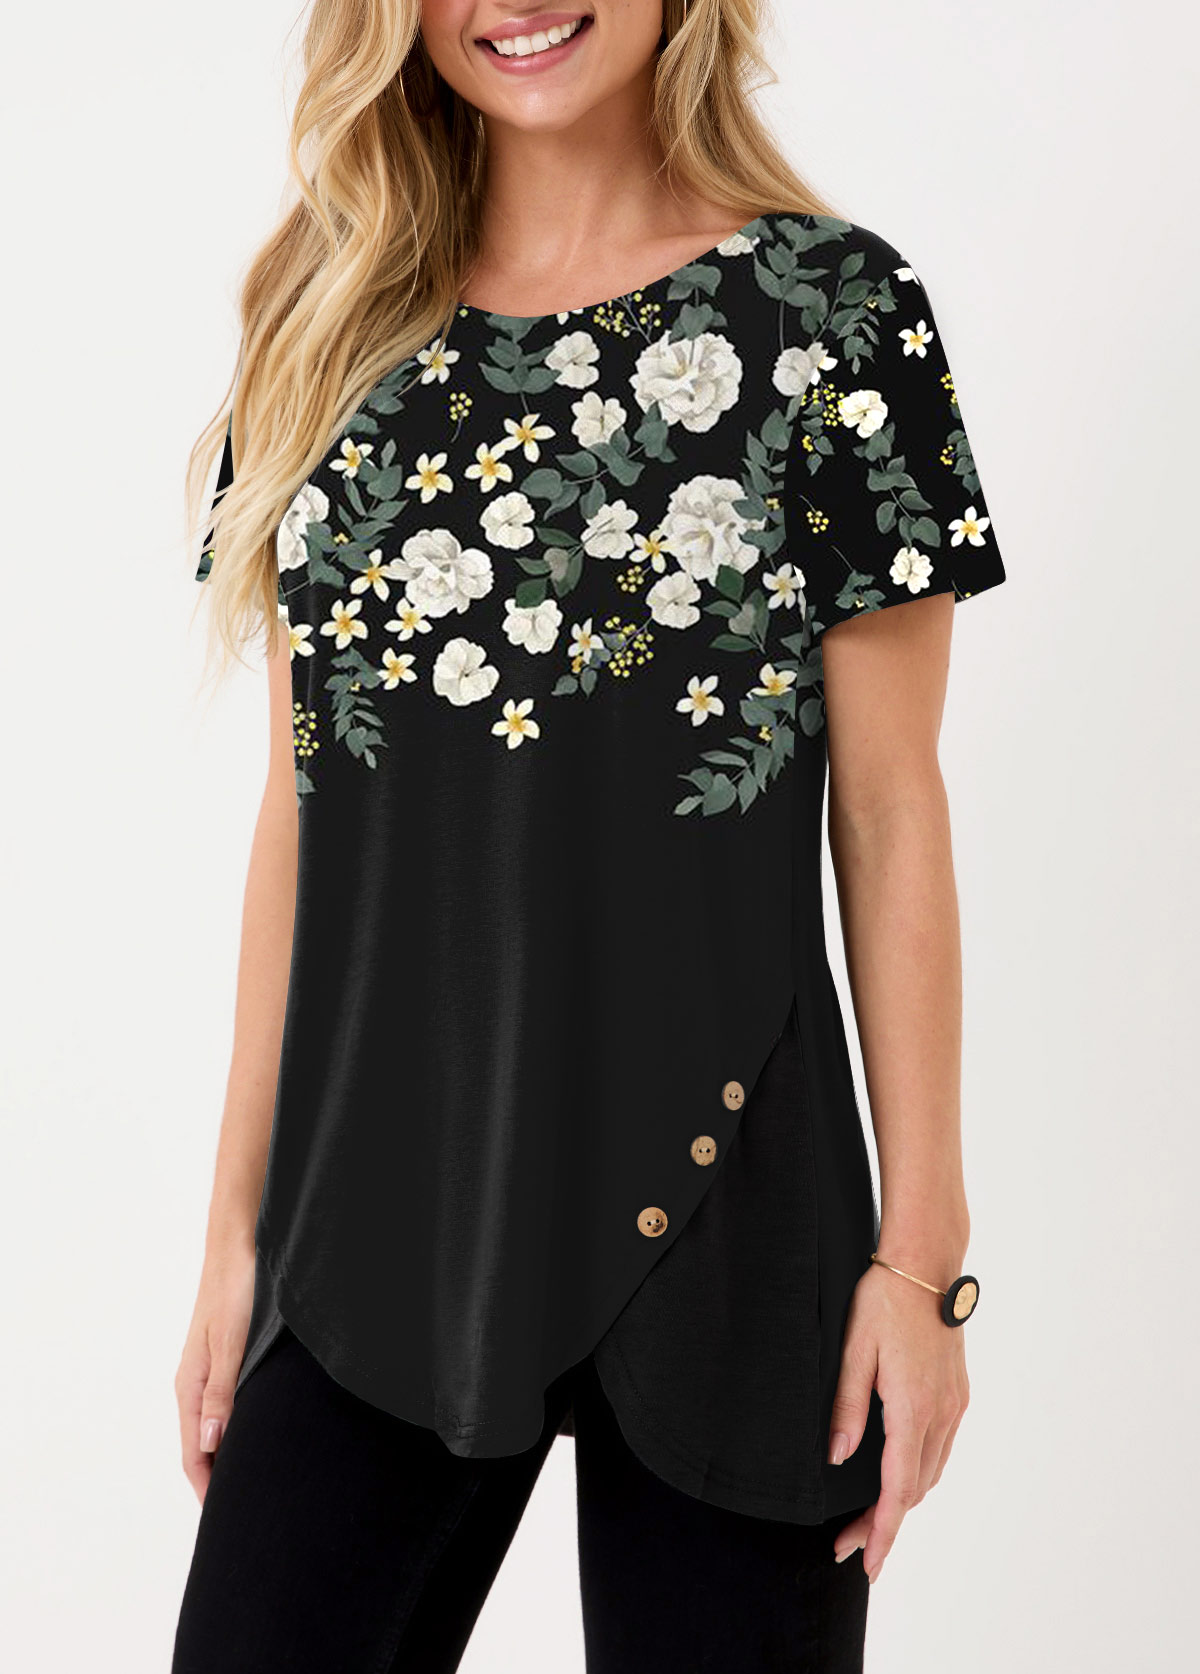 Floral Print Inclined Button Black T Shirt